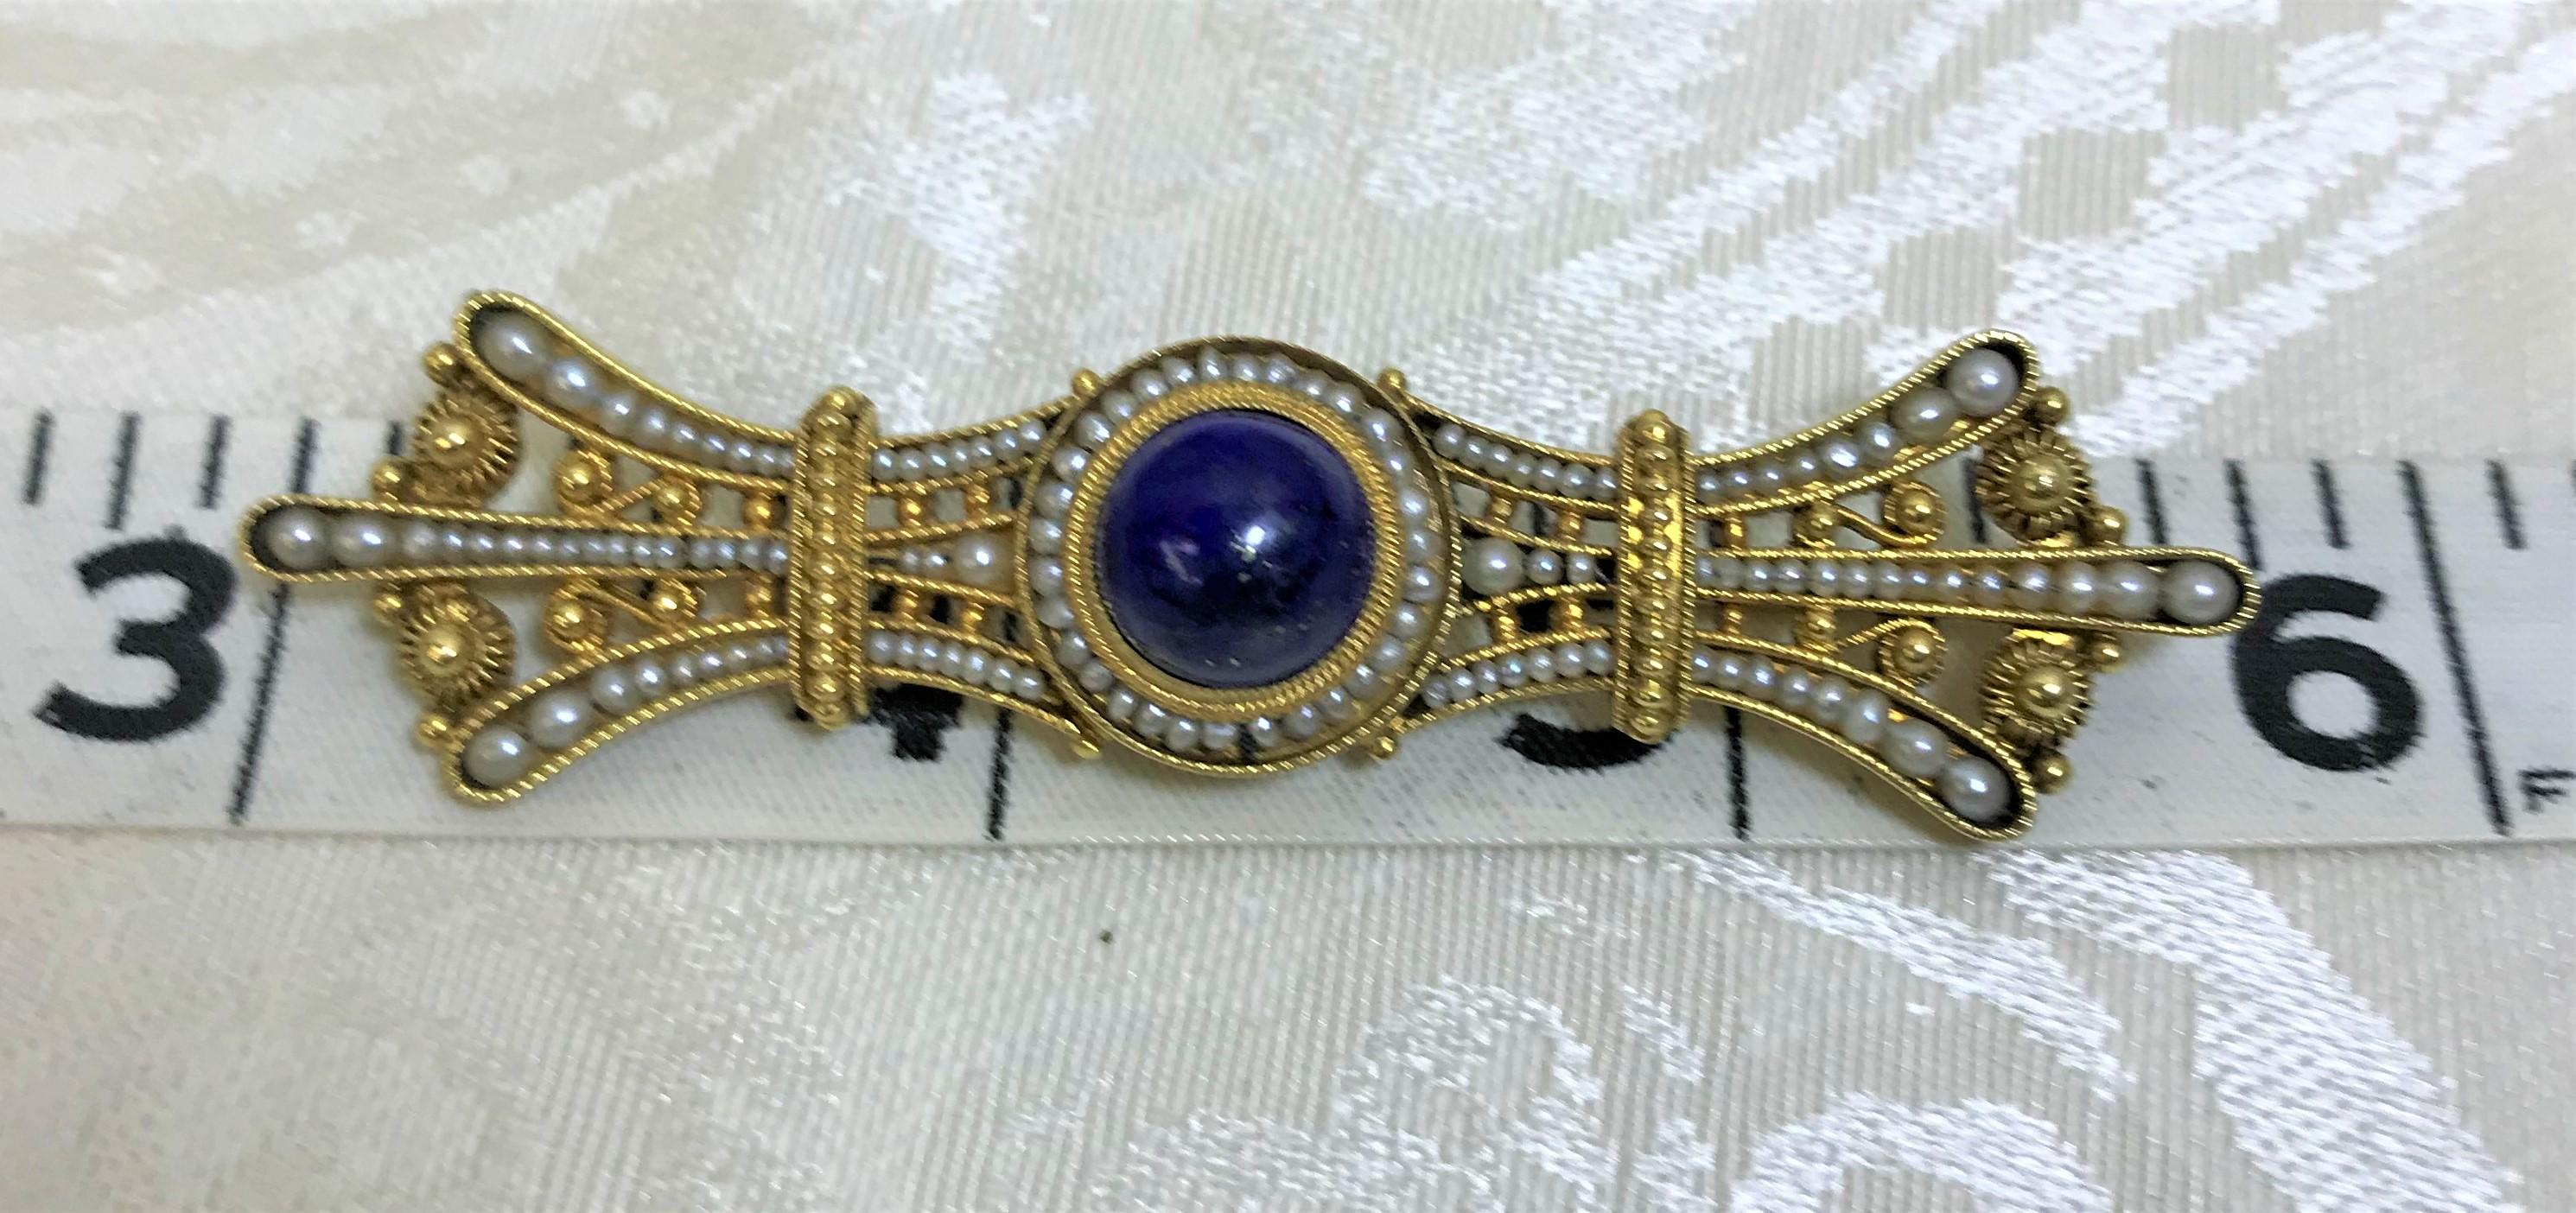 14 Karat Cabochon Lapis Lazuli Seed Pearl Brooch In Excellent Condition For Sale In Cincinnati, OH